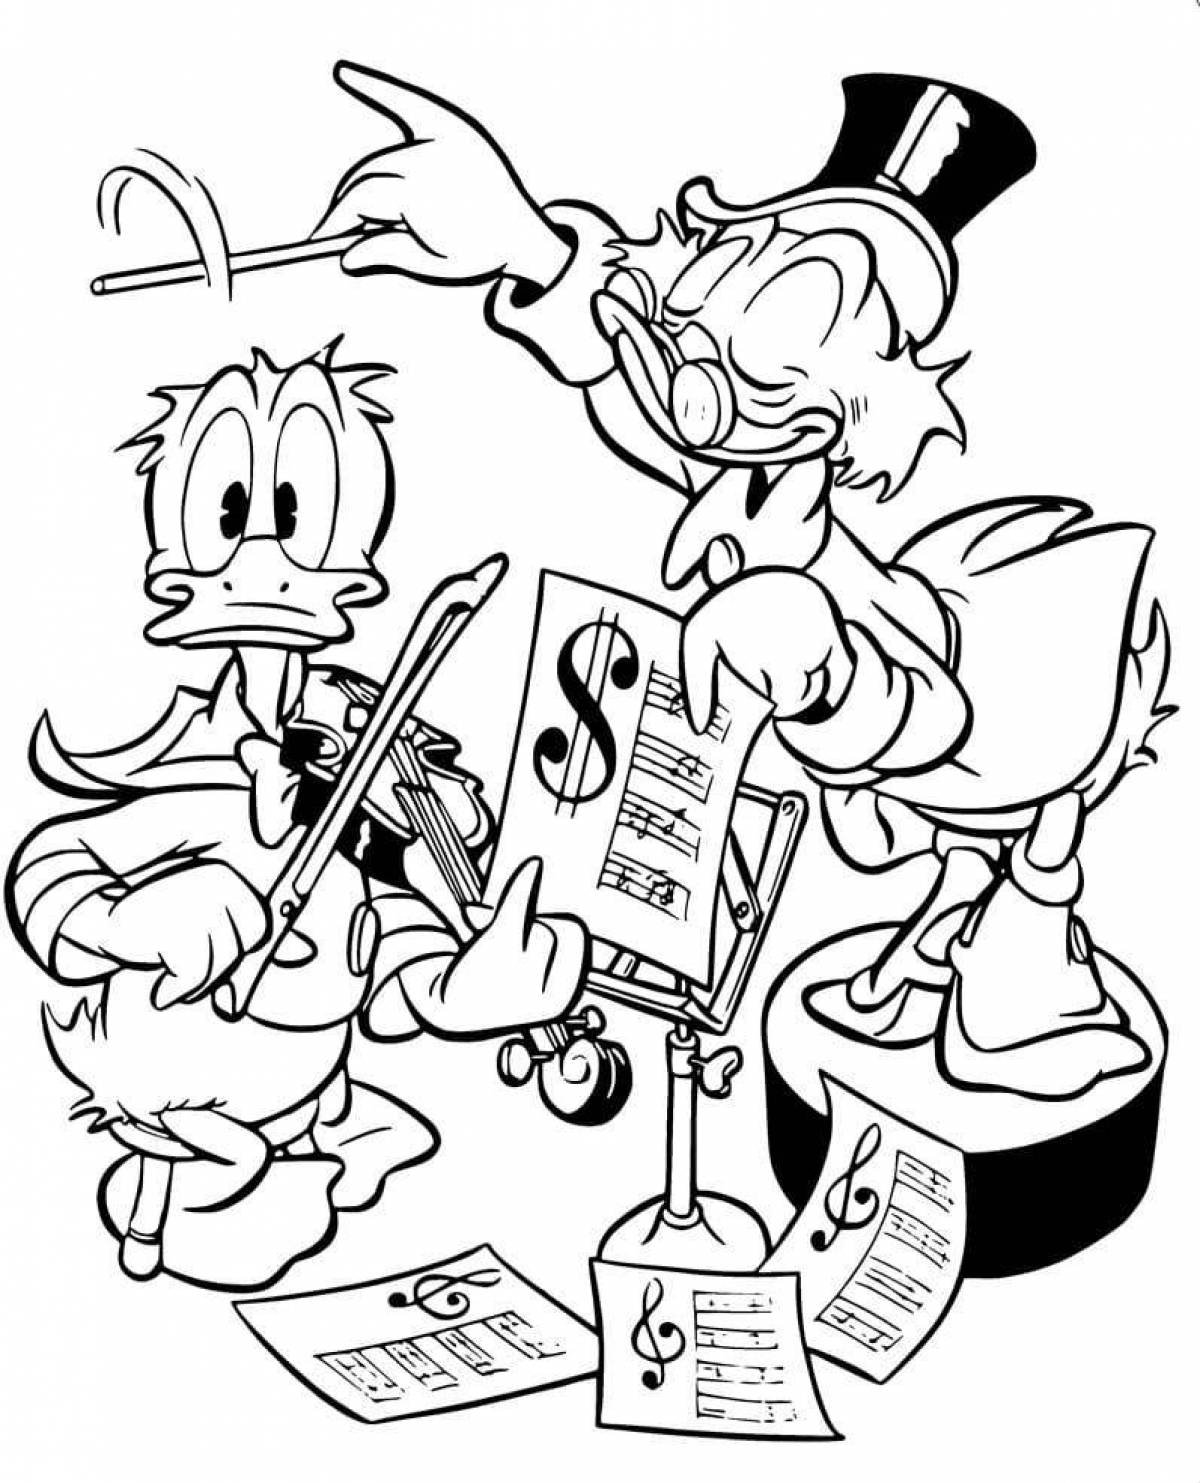 Coloring lively scrooge mcduck